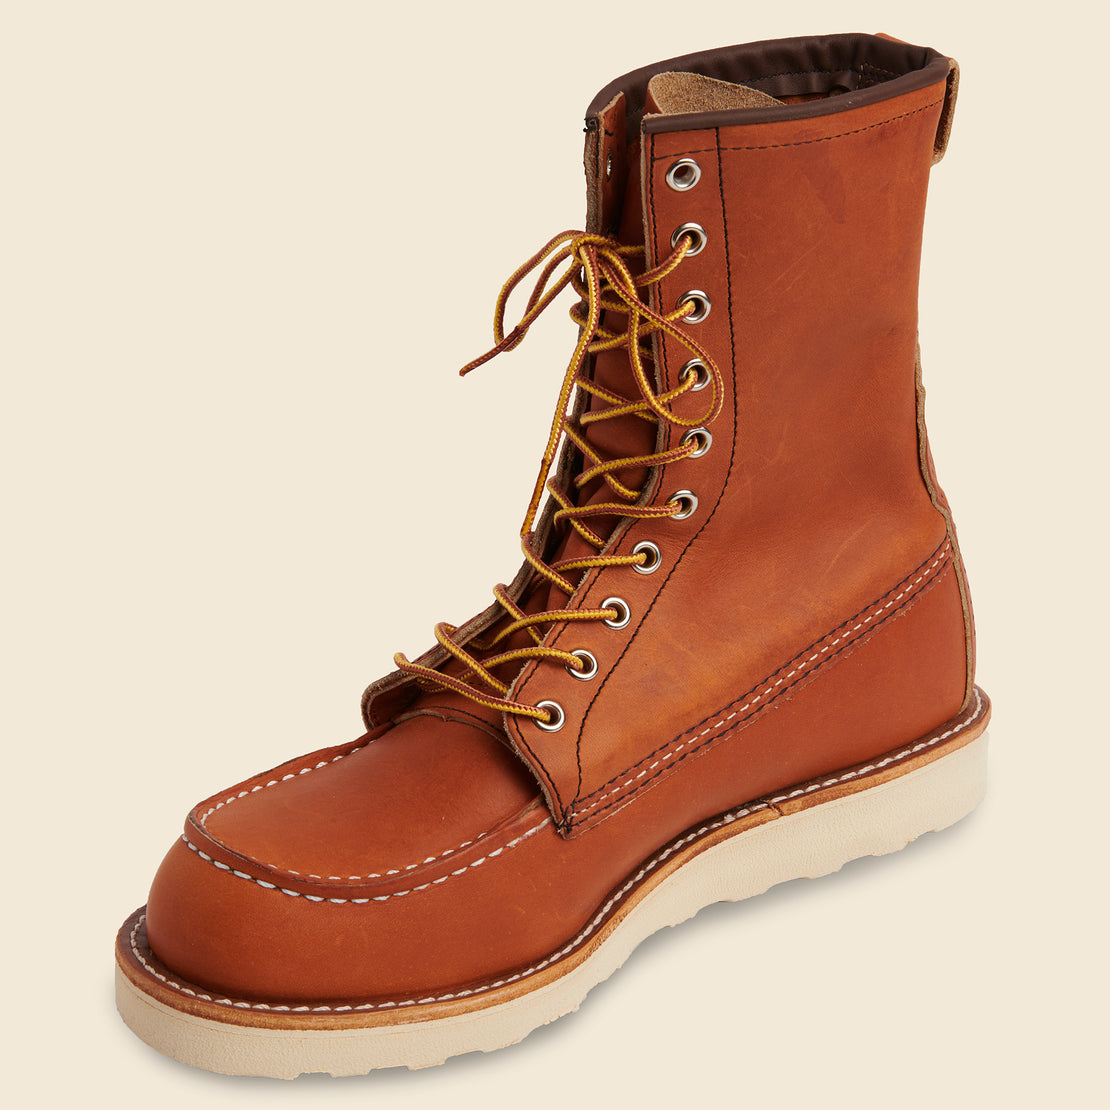 The Ideal Boots For Winter Red Wing's 875 Heritage Work Moc Toe Boot